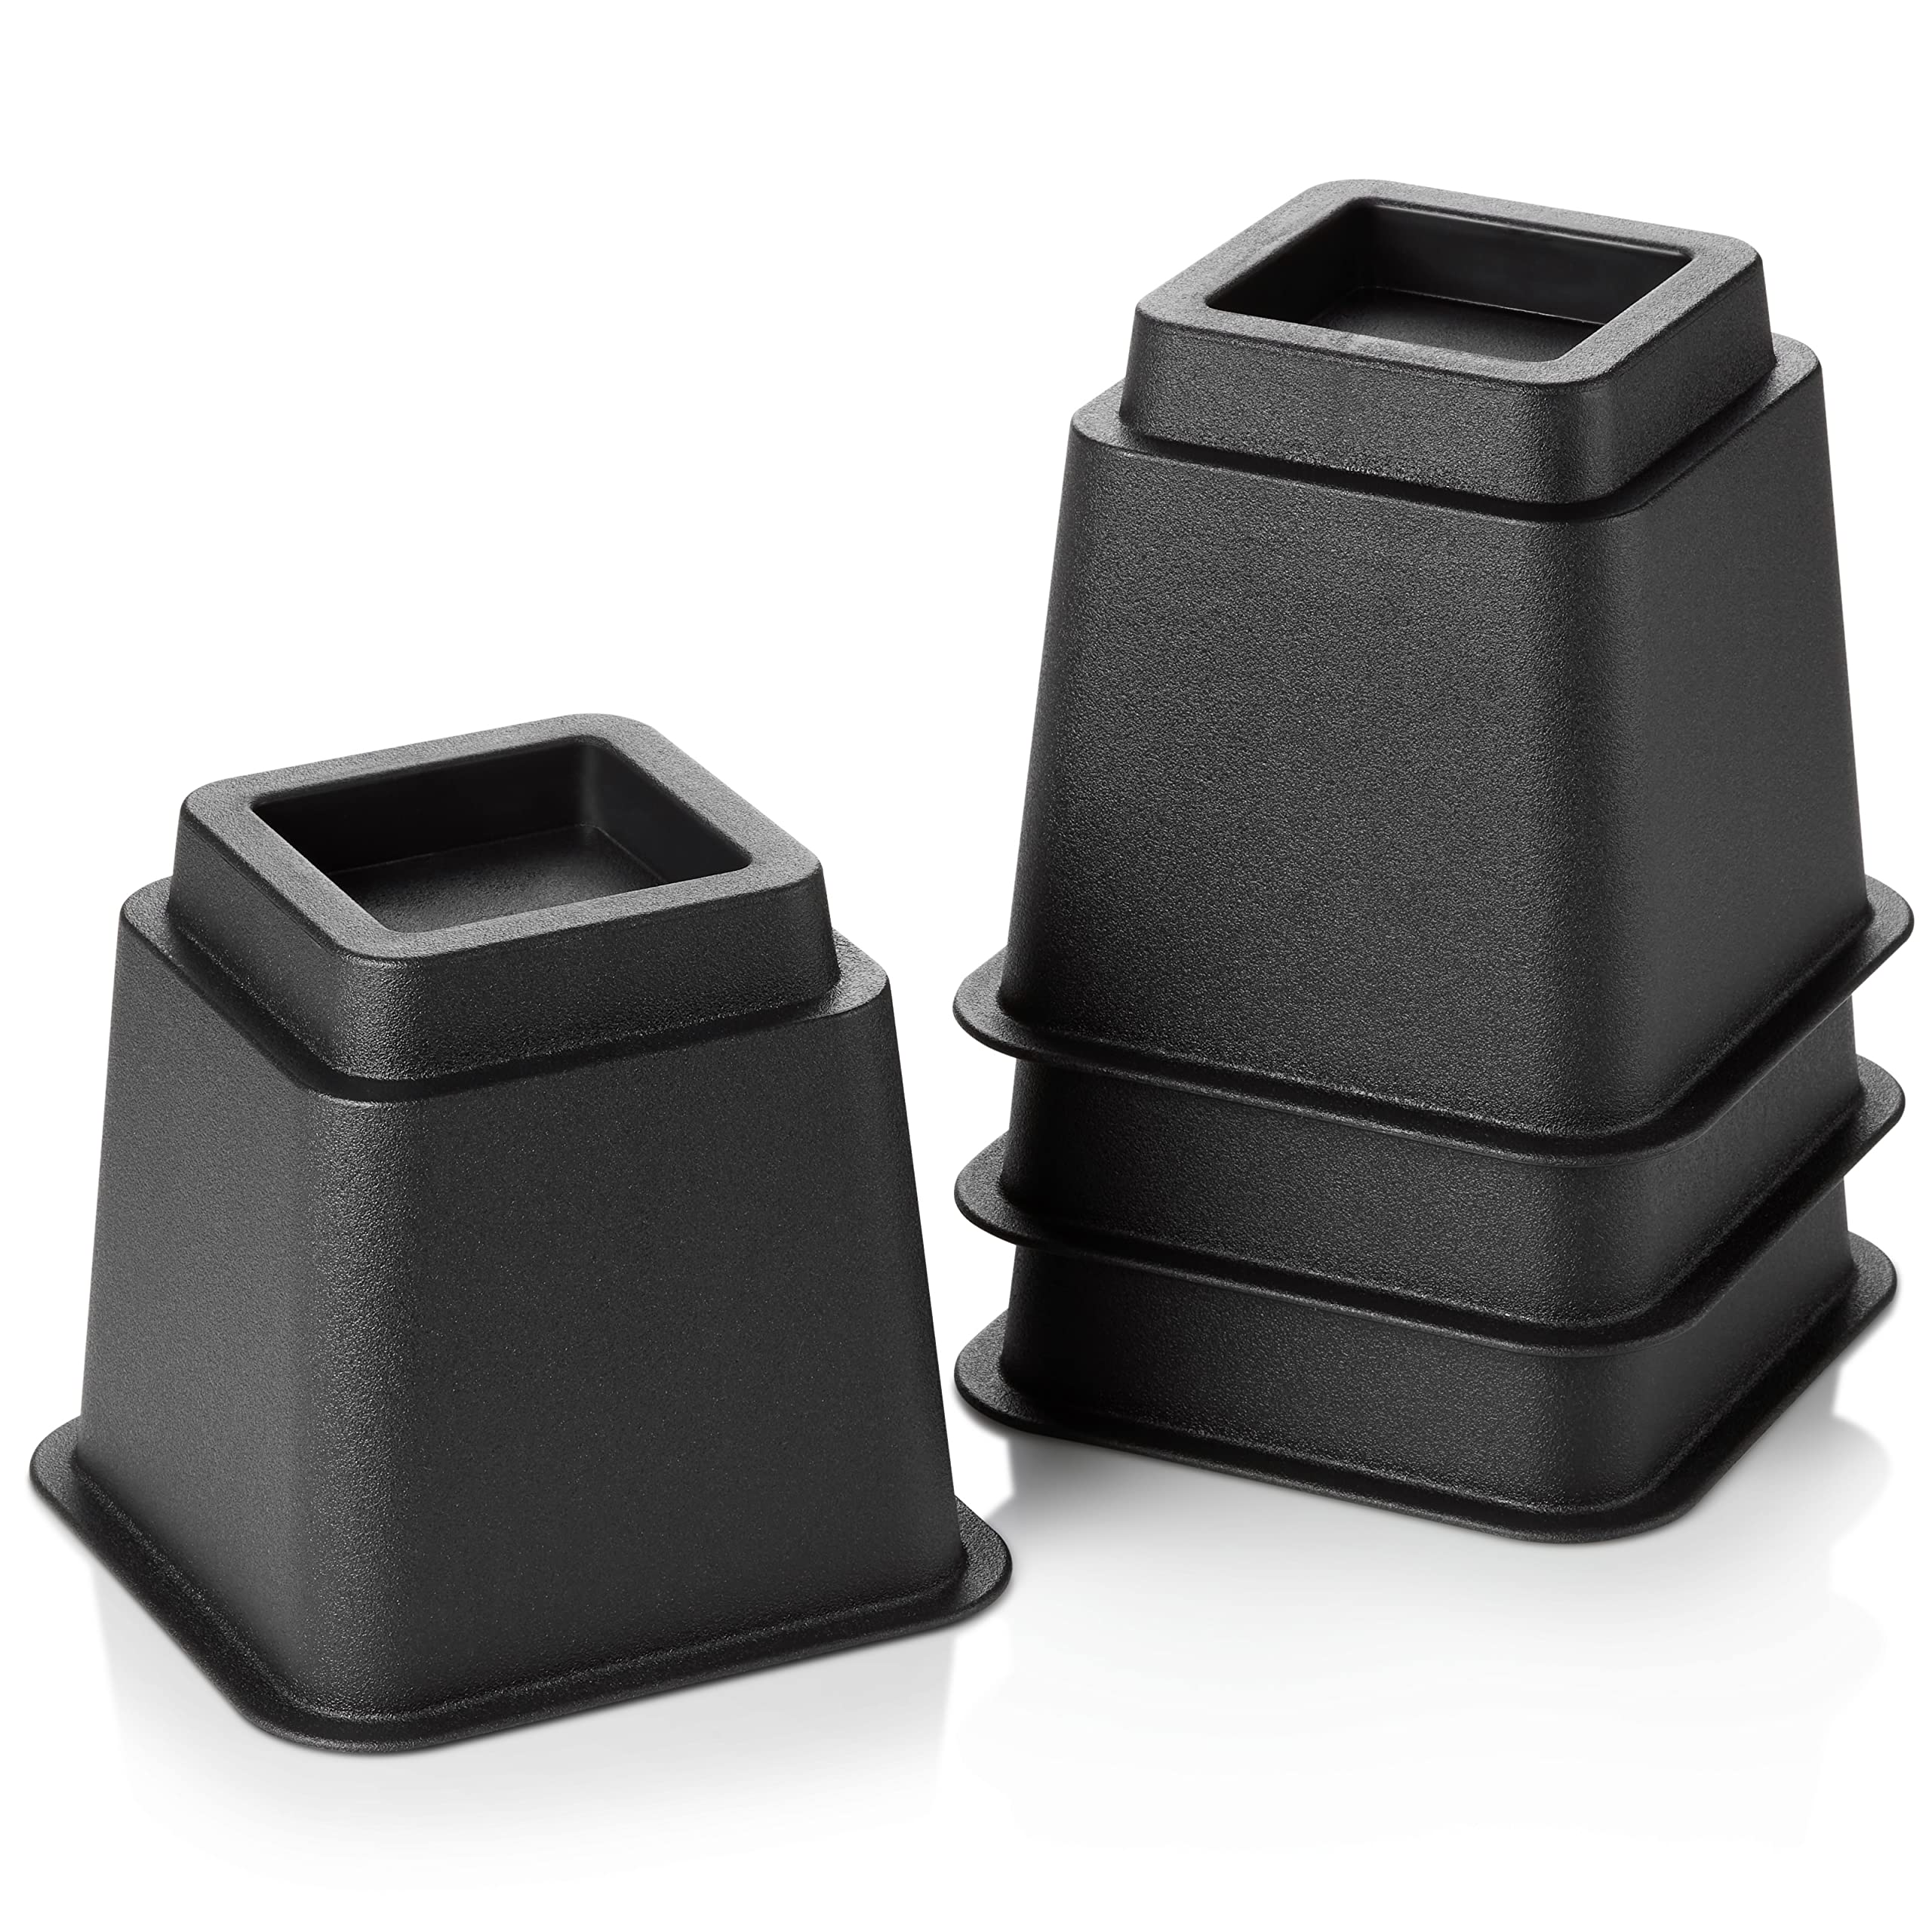 HOLDN’ STORAGE Bed Risers, Furniture Risers - Heavy Duty